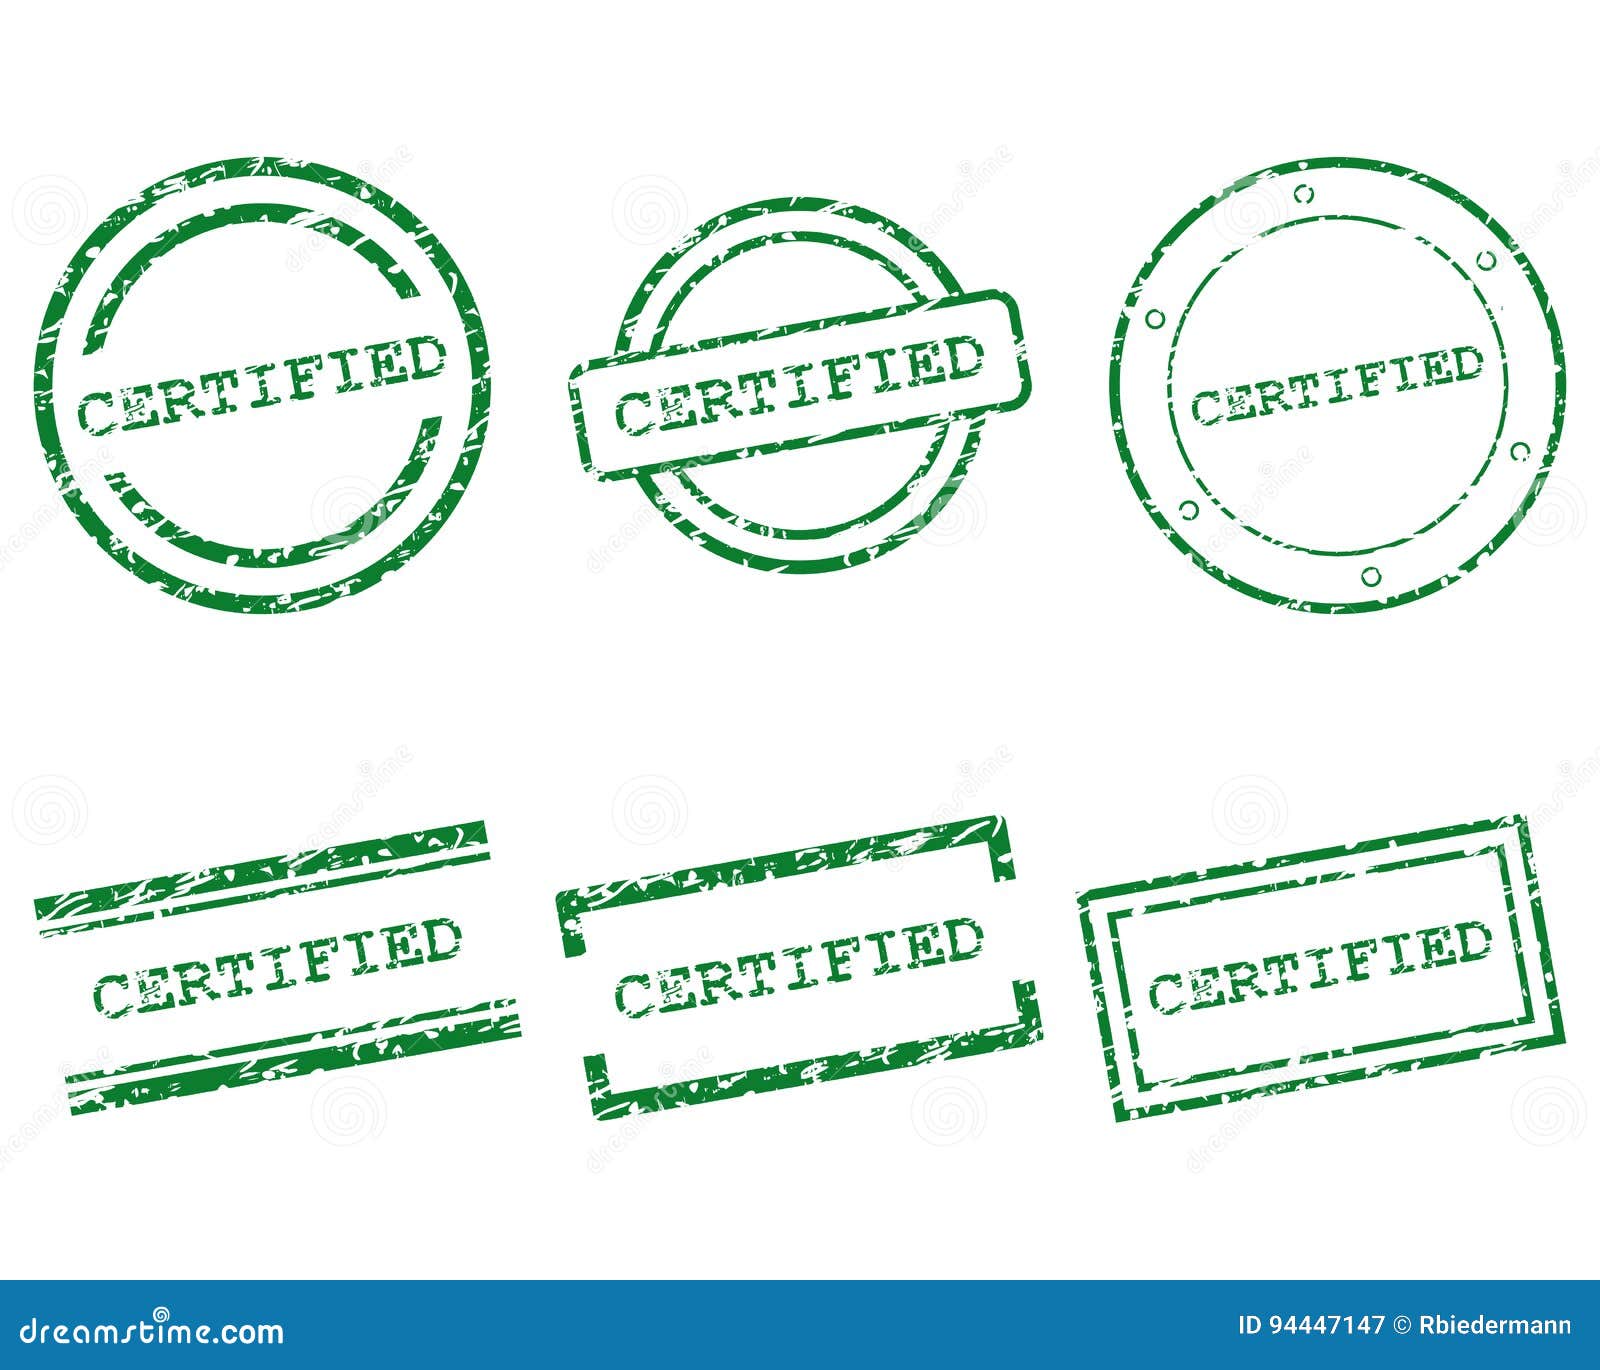 Detailed and accurate illustration of certified stamps